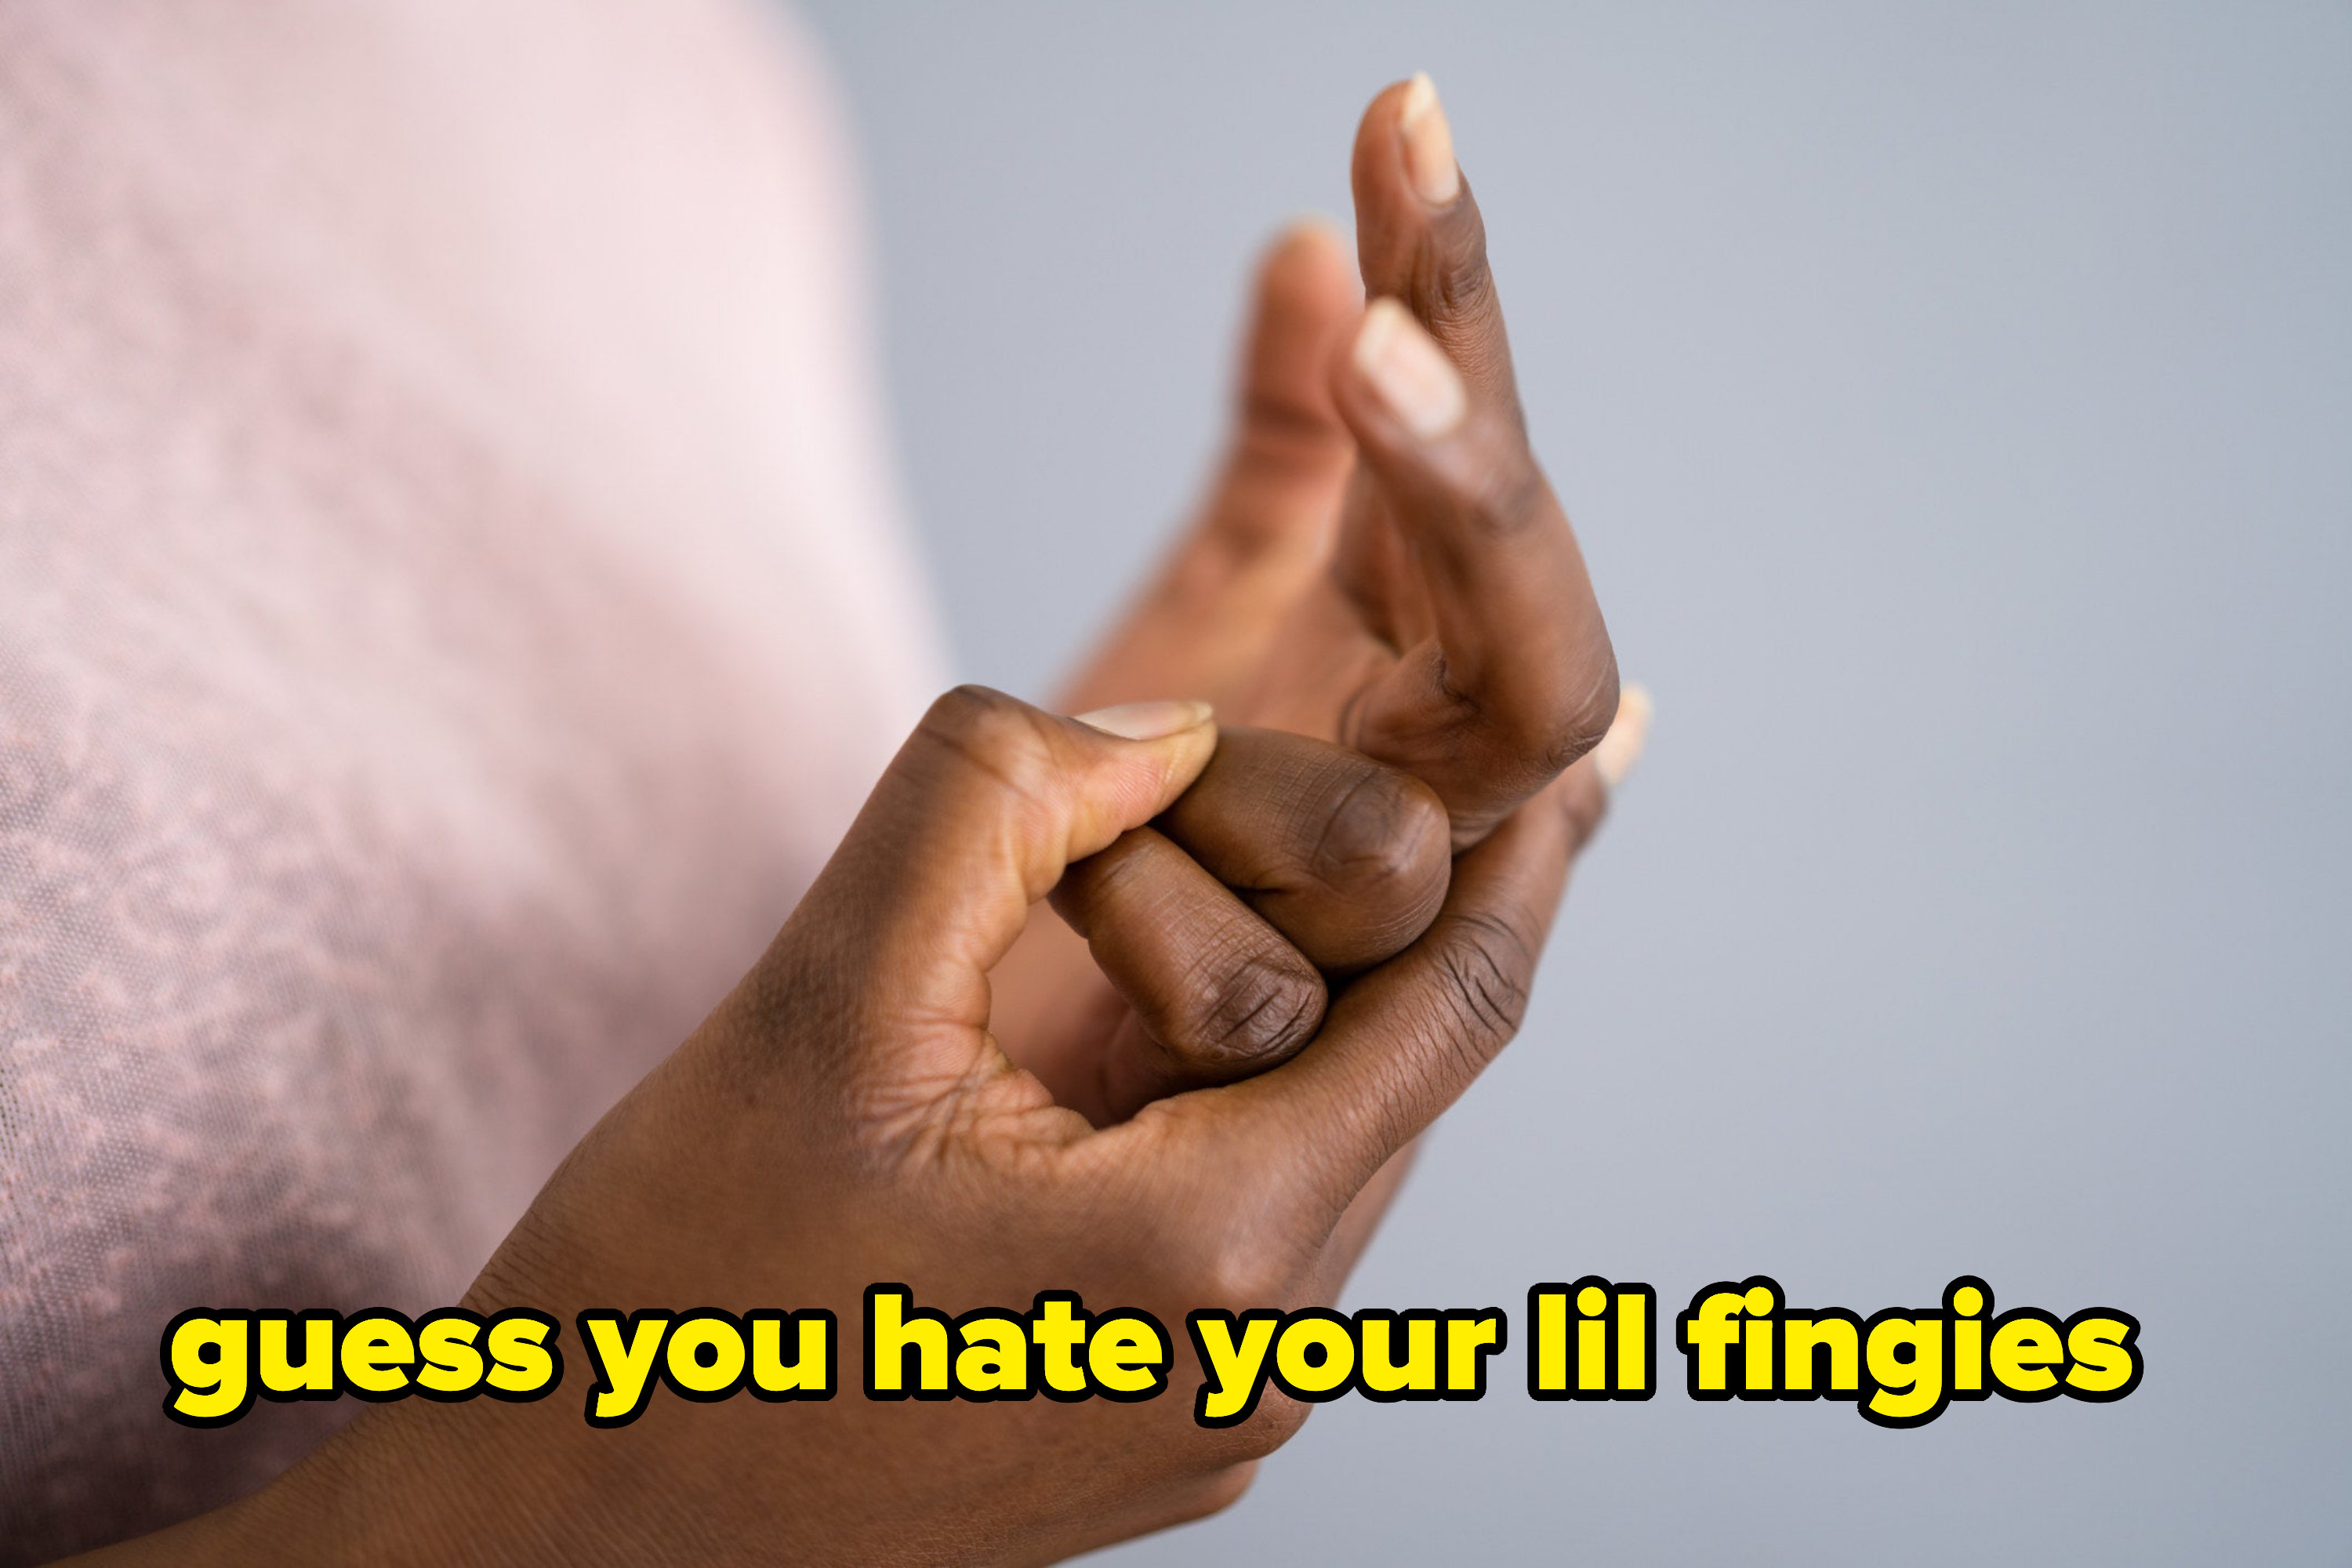 &quot;Guess you hate your lil fingies&quot;